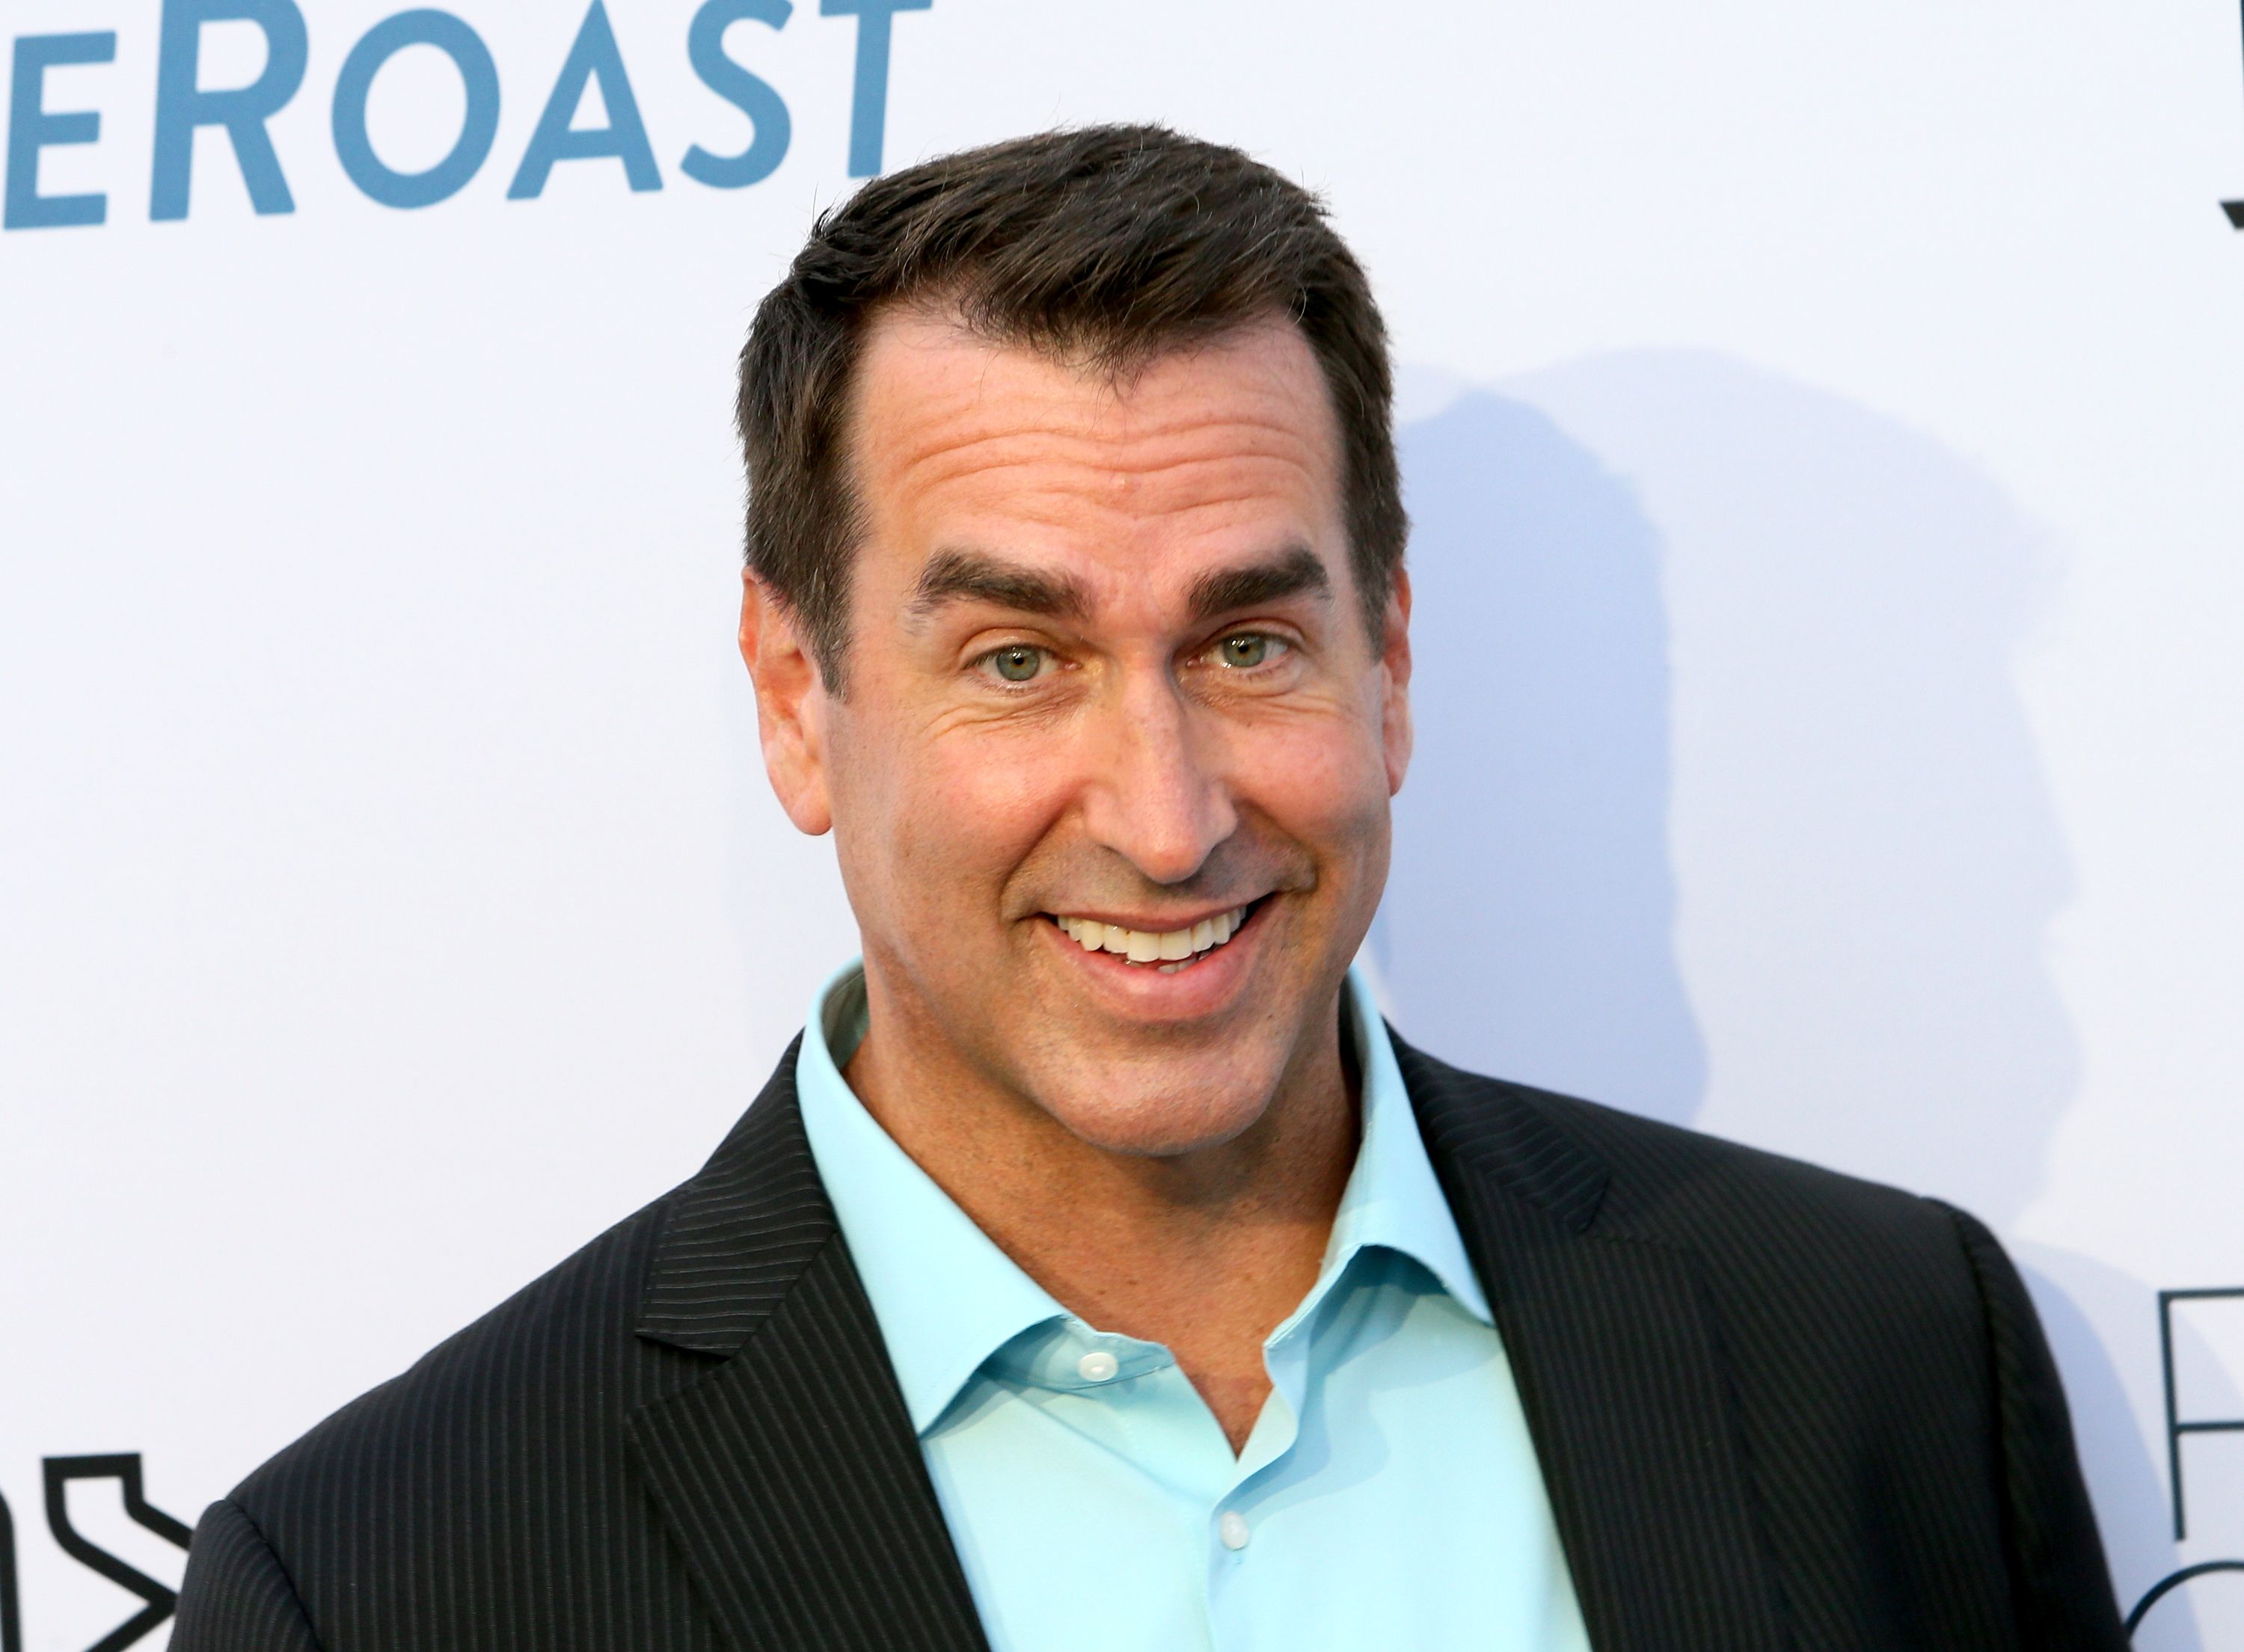 Rob Riggle Facts - Military Service, Career, Wife, Net Worth